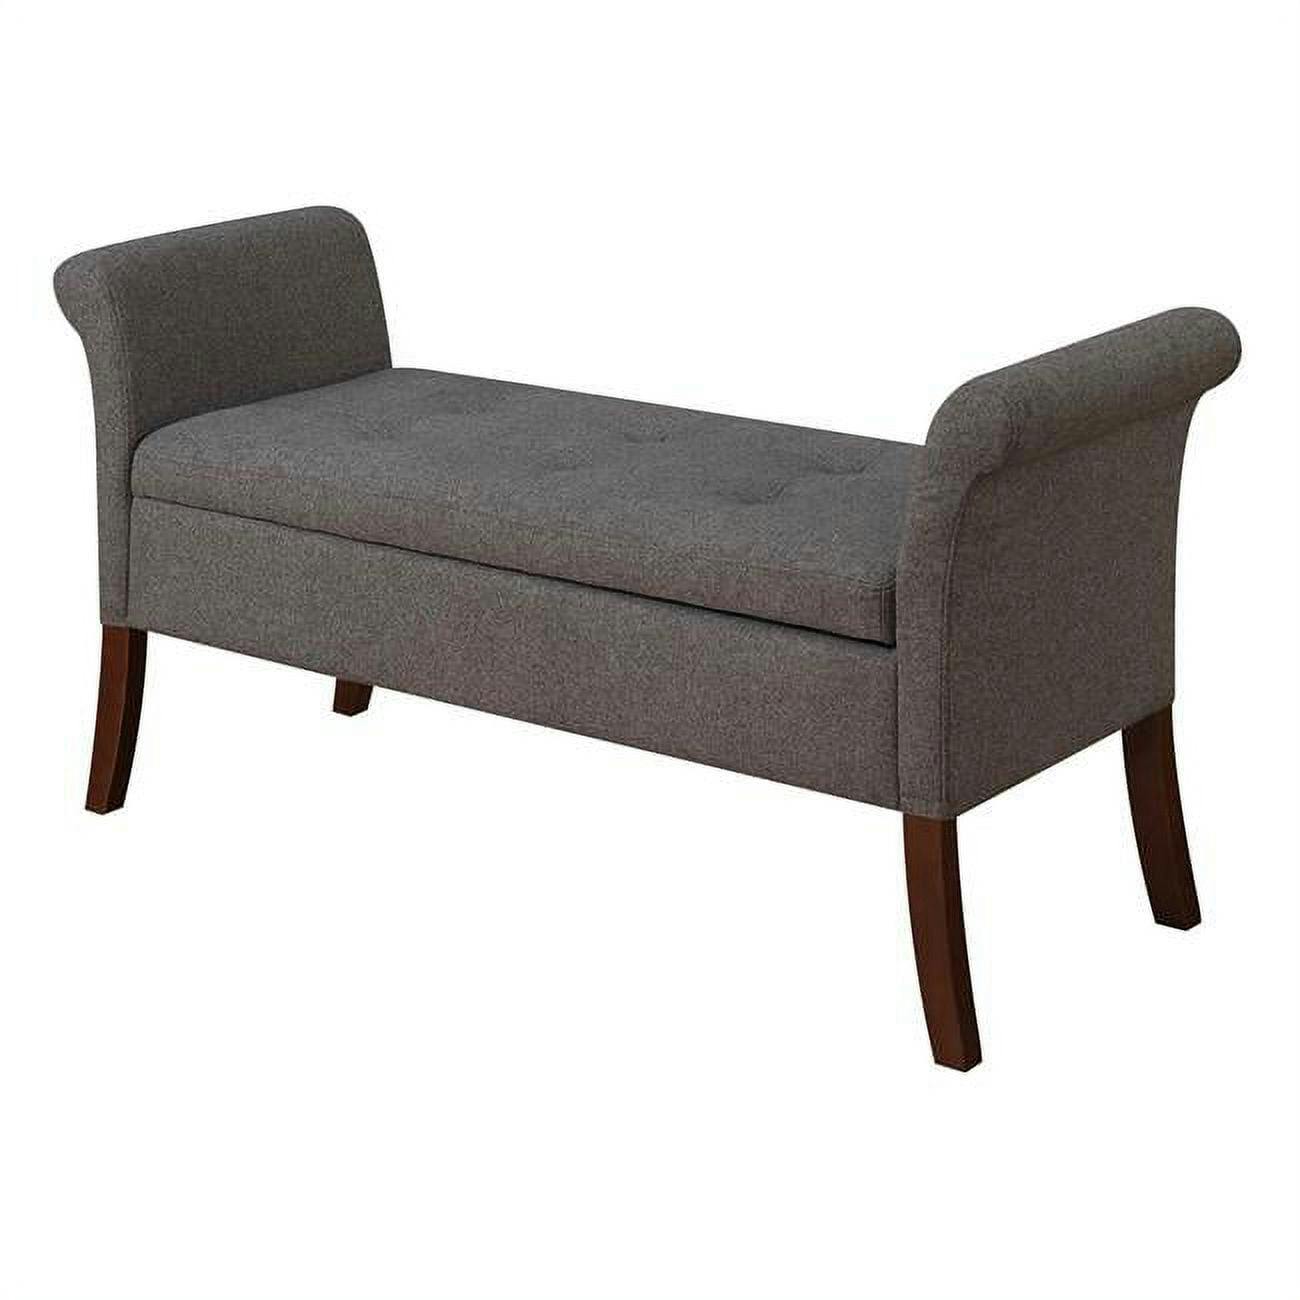 Elegant Soft Gray Fabric Storage Bench with Tufted Seat